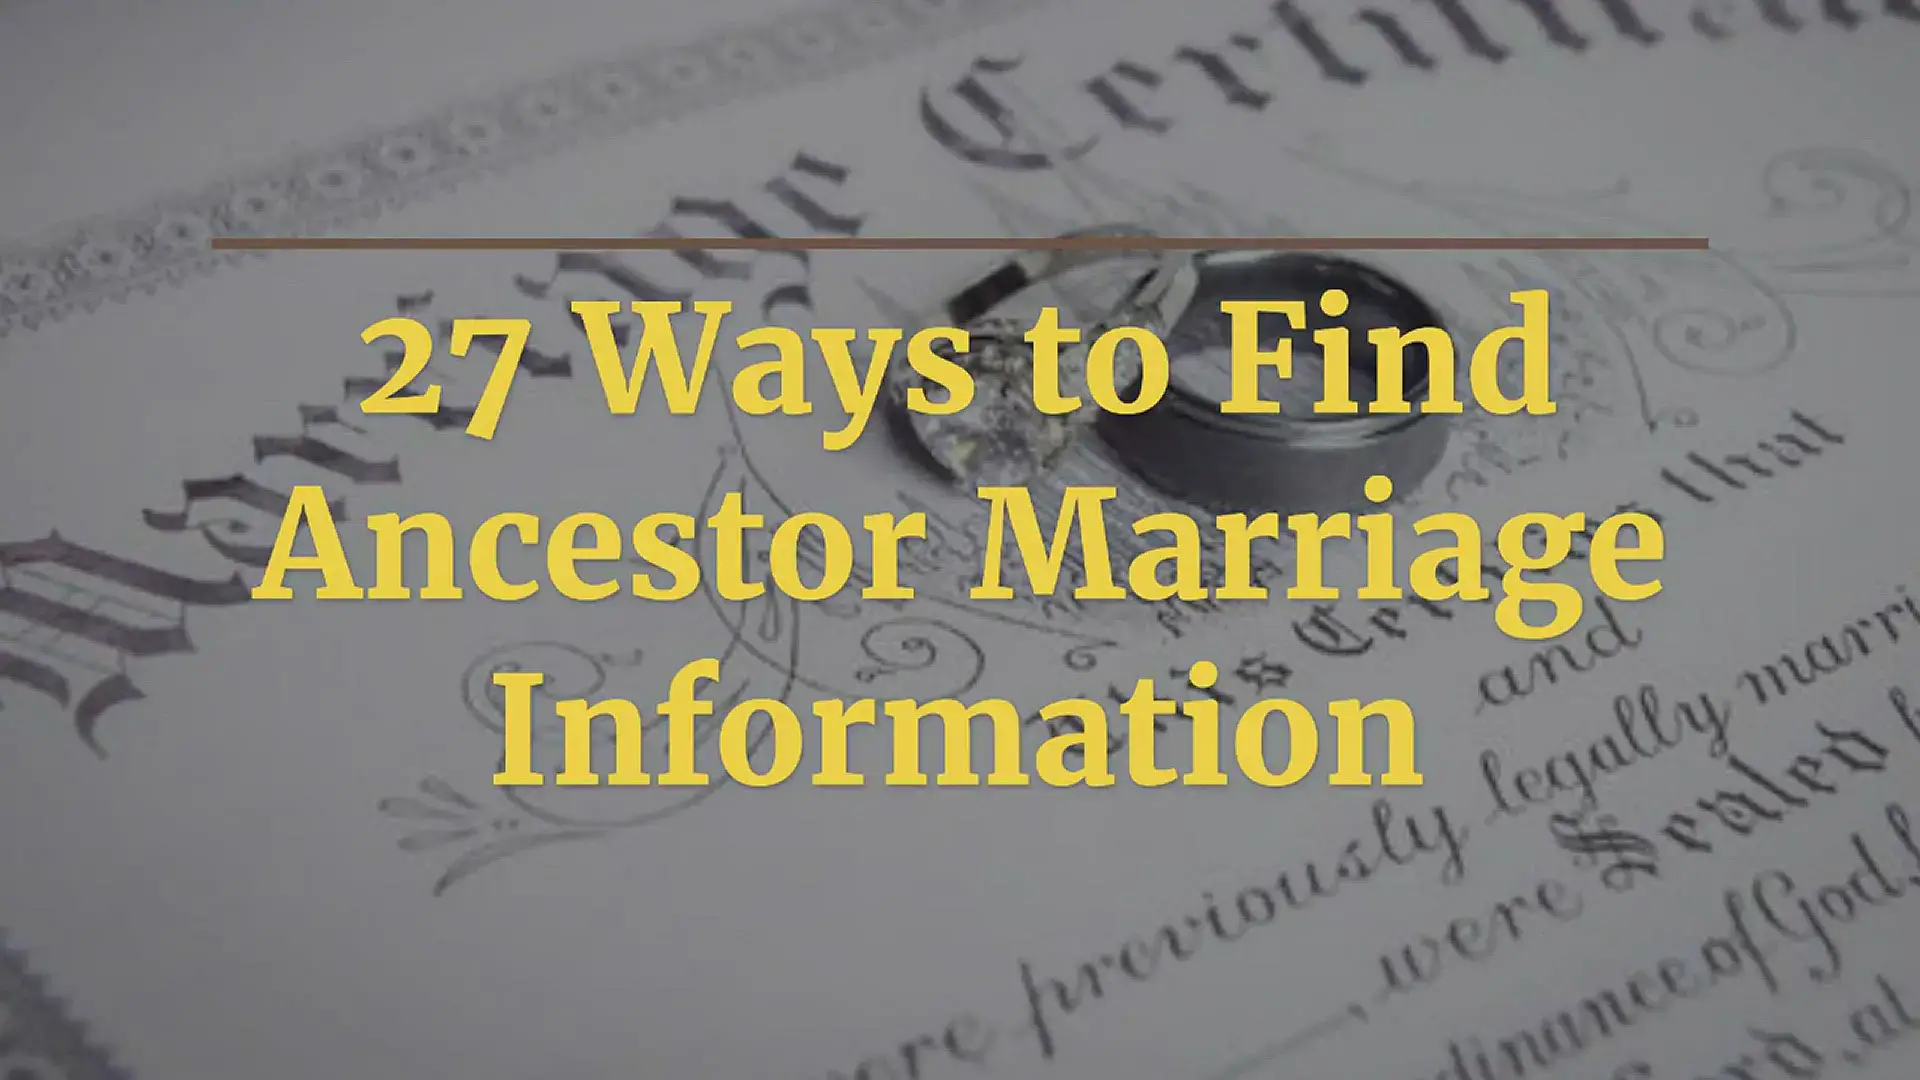 'Video thumbnail for 27 Ways to Find Ancestor Marriage Information'